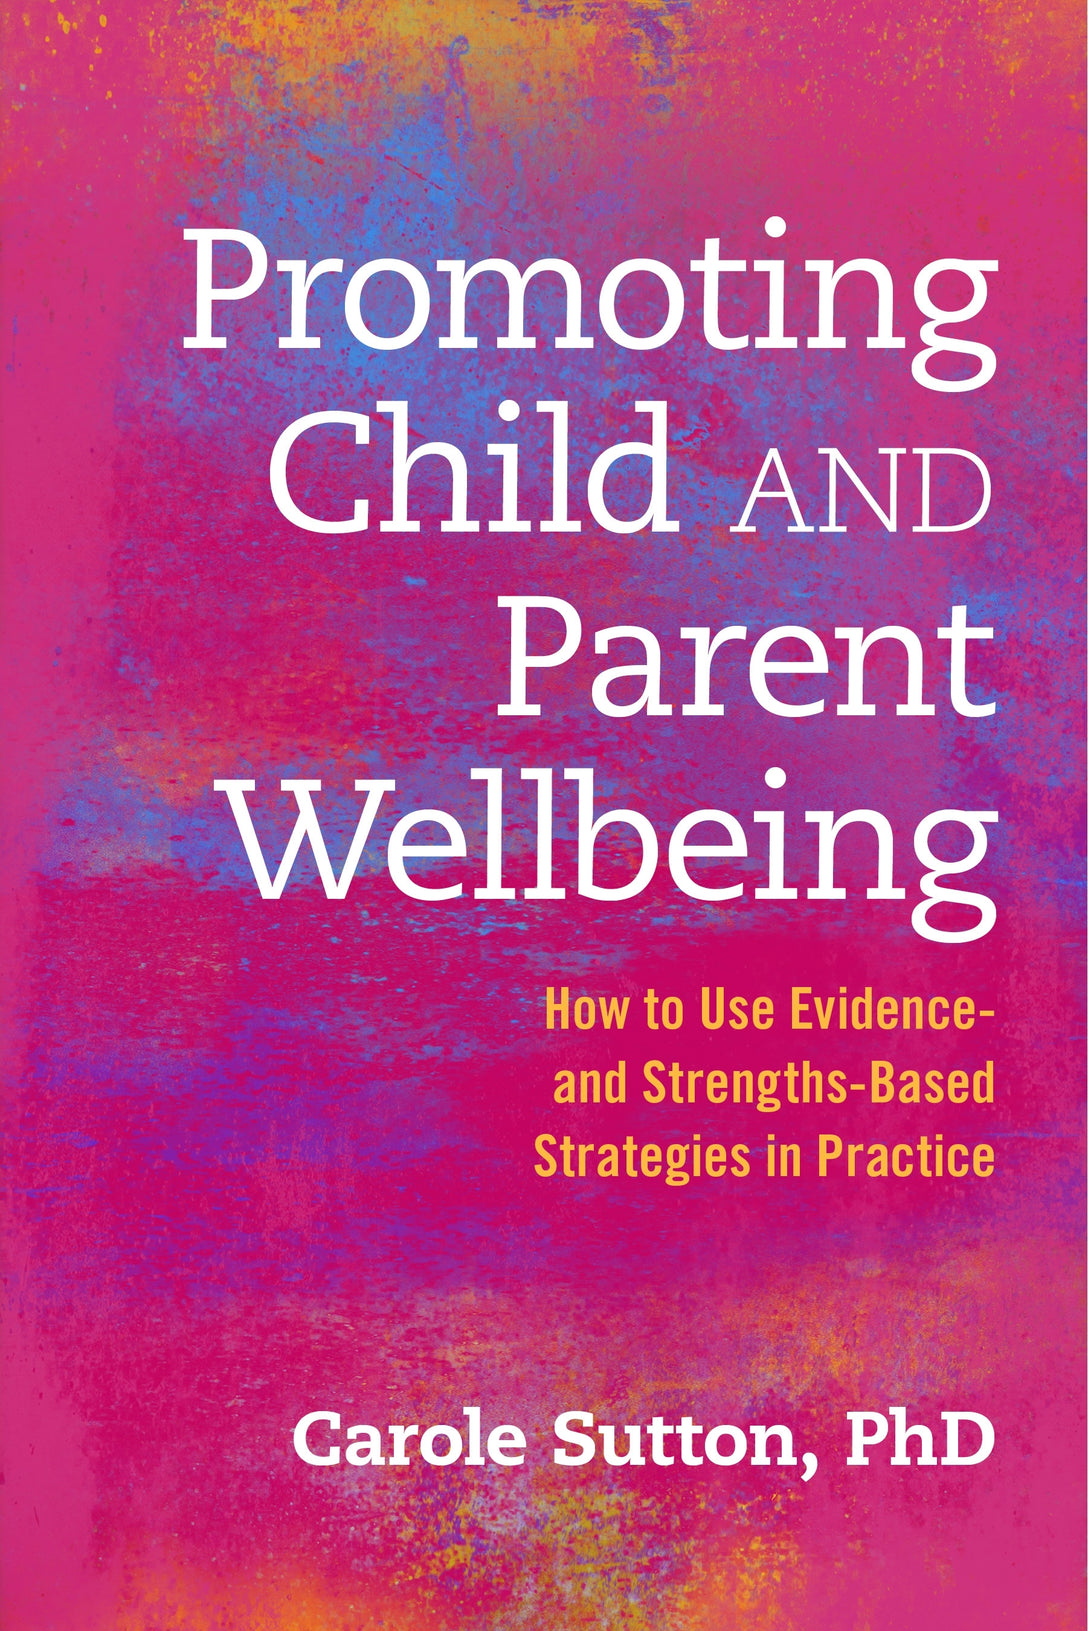 Promoting Child and Parent Wellbeing by Carole Sutton